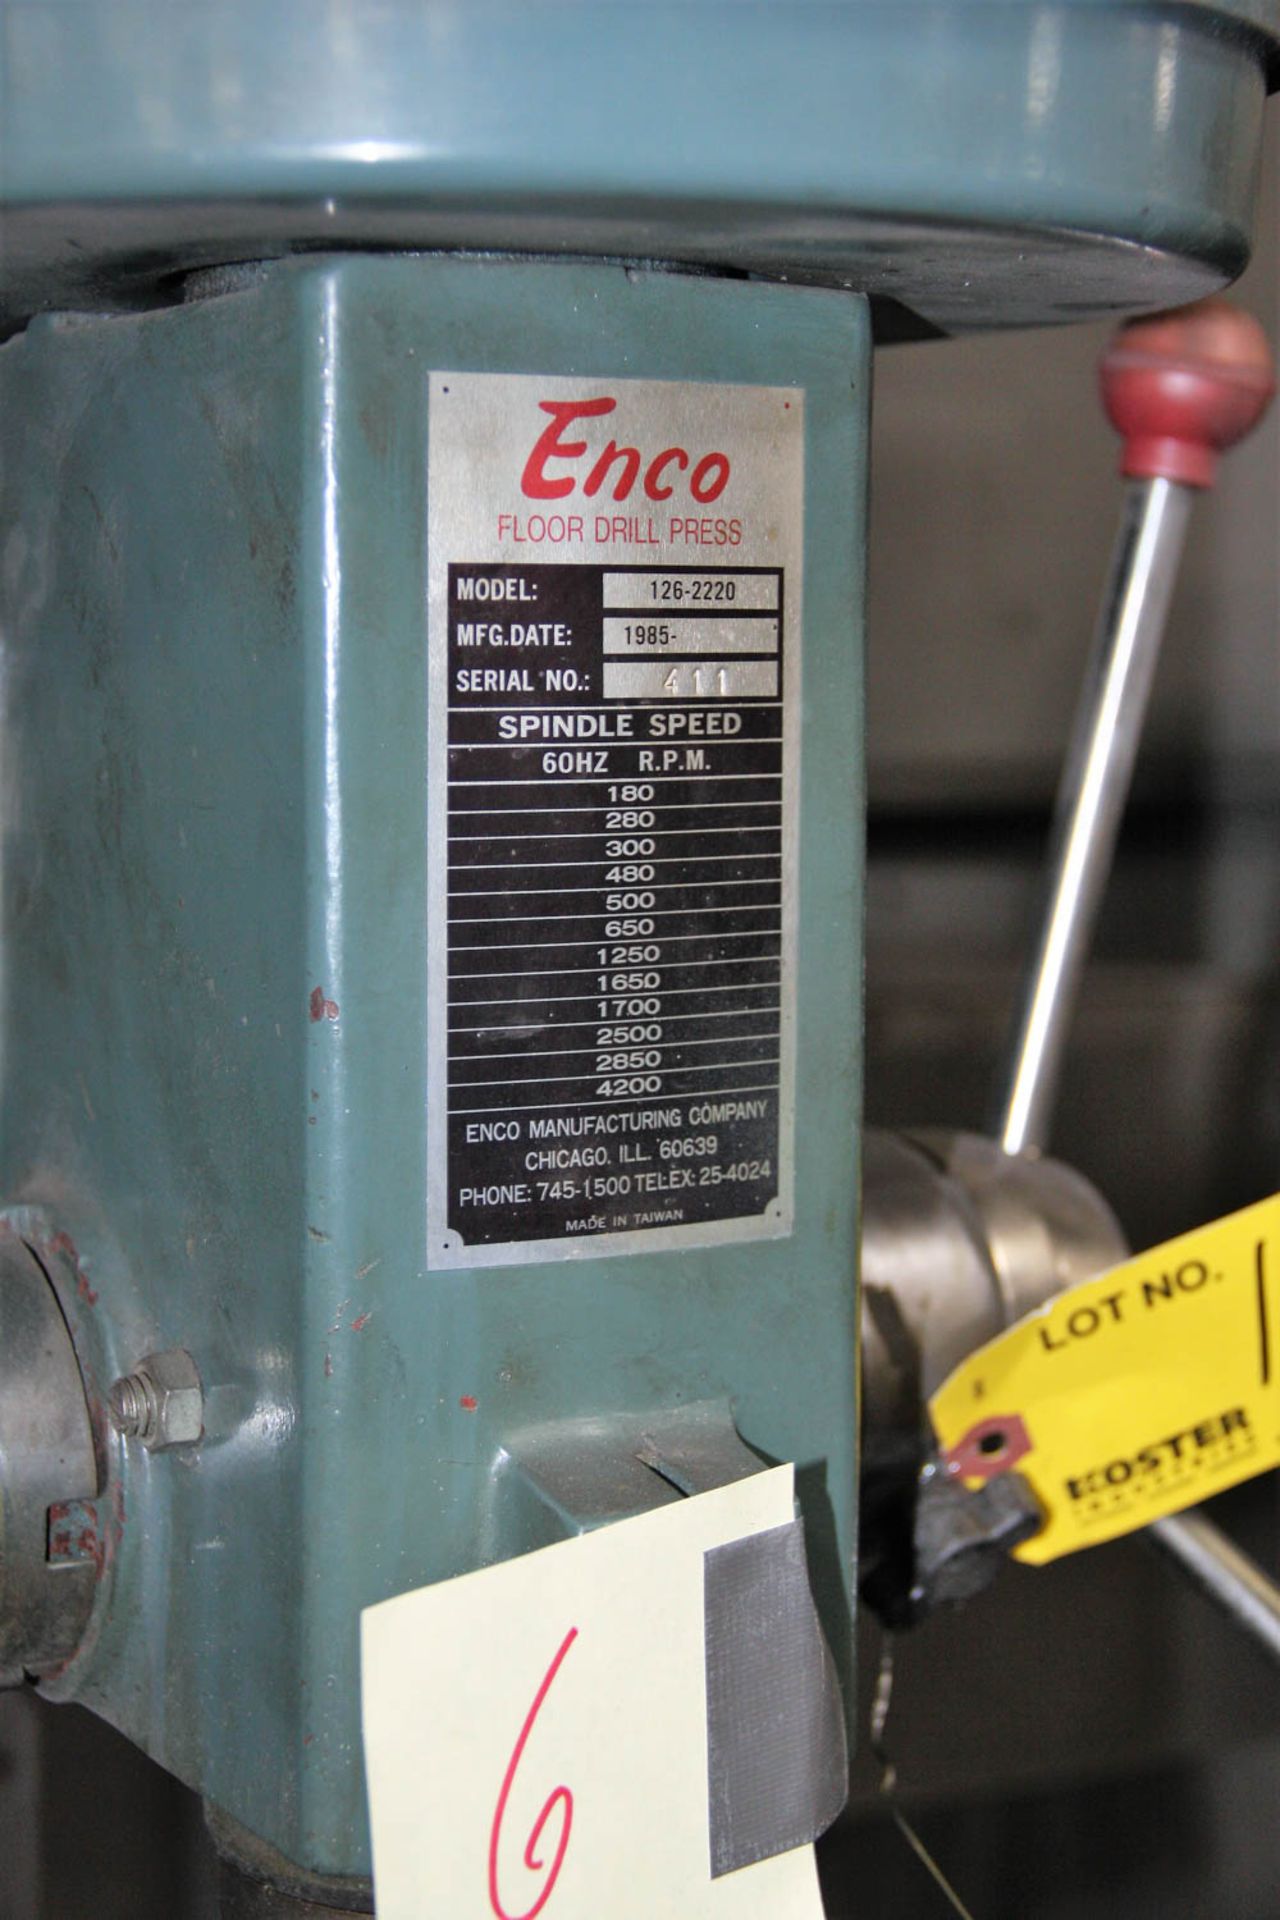 22" ENCO MDL.126-2220 FLOOR TYPE DRILL PRESS, DRILL CHUCK, 180-4200 RPM, 13-1/2" X 16" TABLE, SINGLE - Image 2 of 3